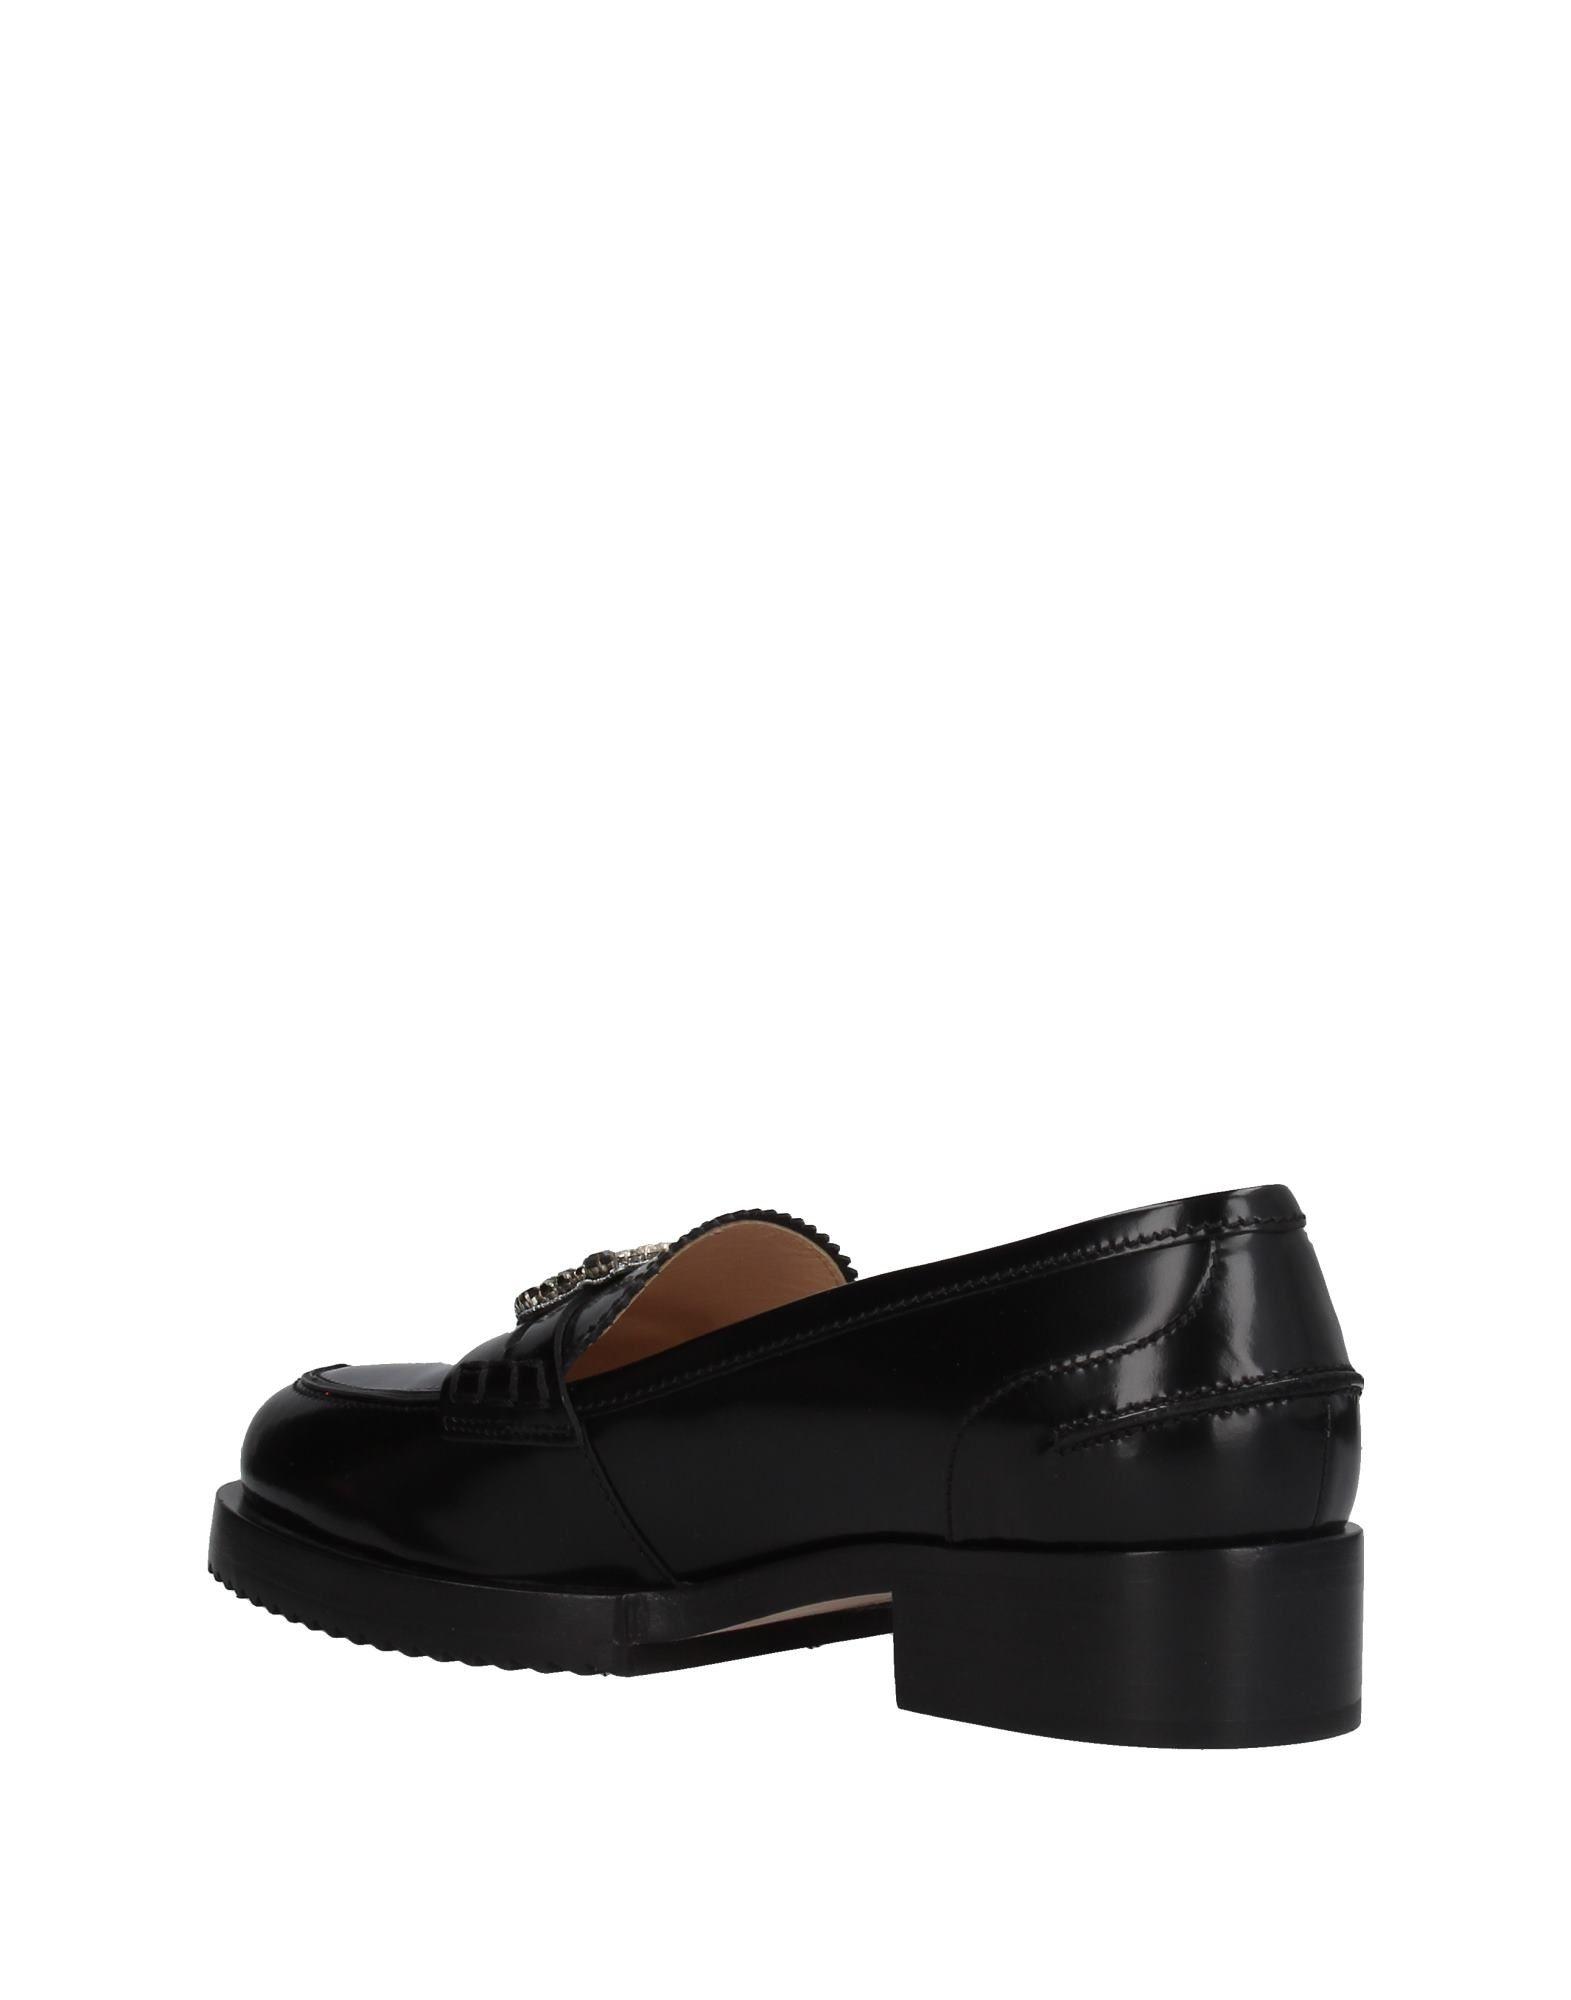 N°21 Leather Loafer in Black - Save 46% - Lyst